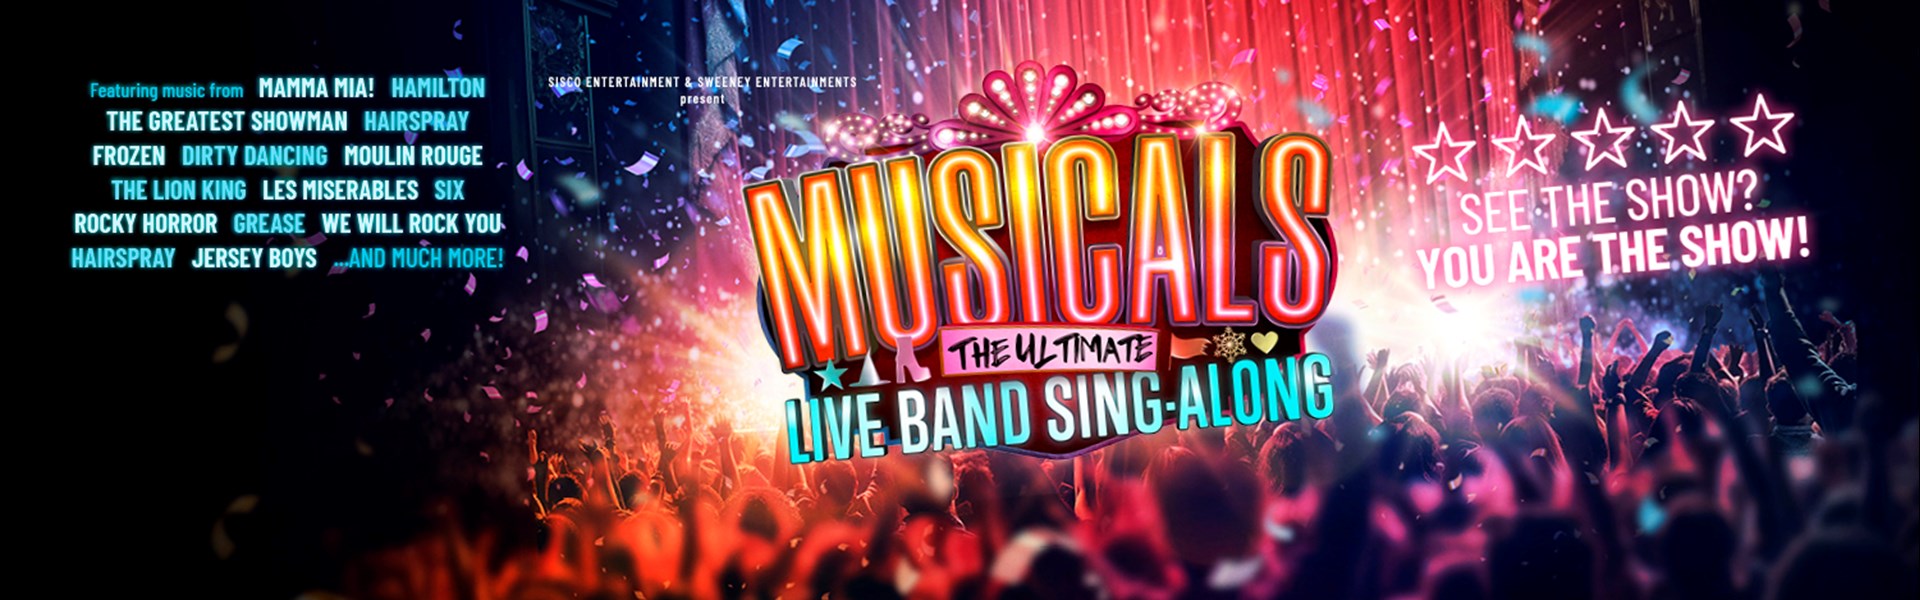 Musicals: The Ultimate Live Band Sing-Along